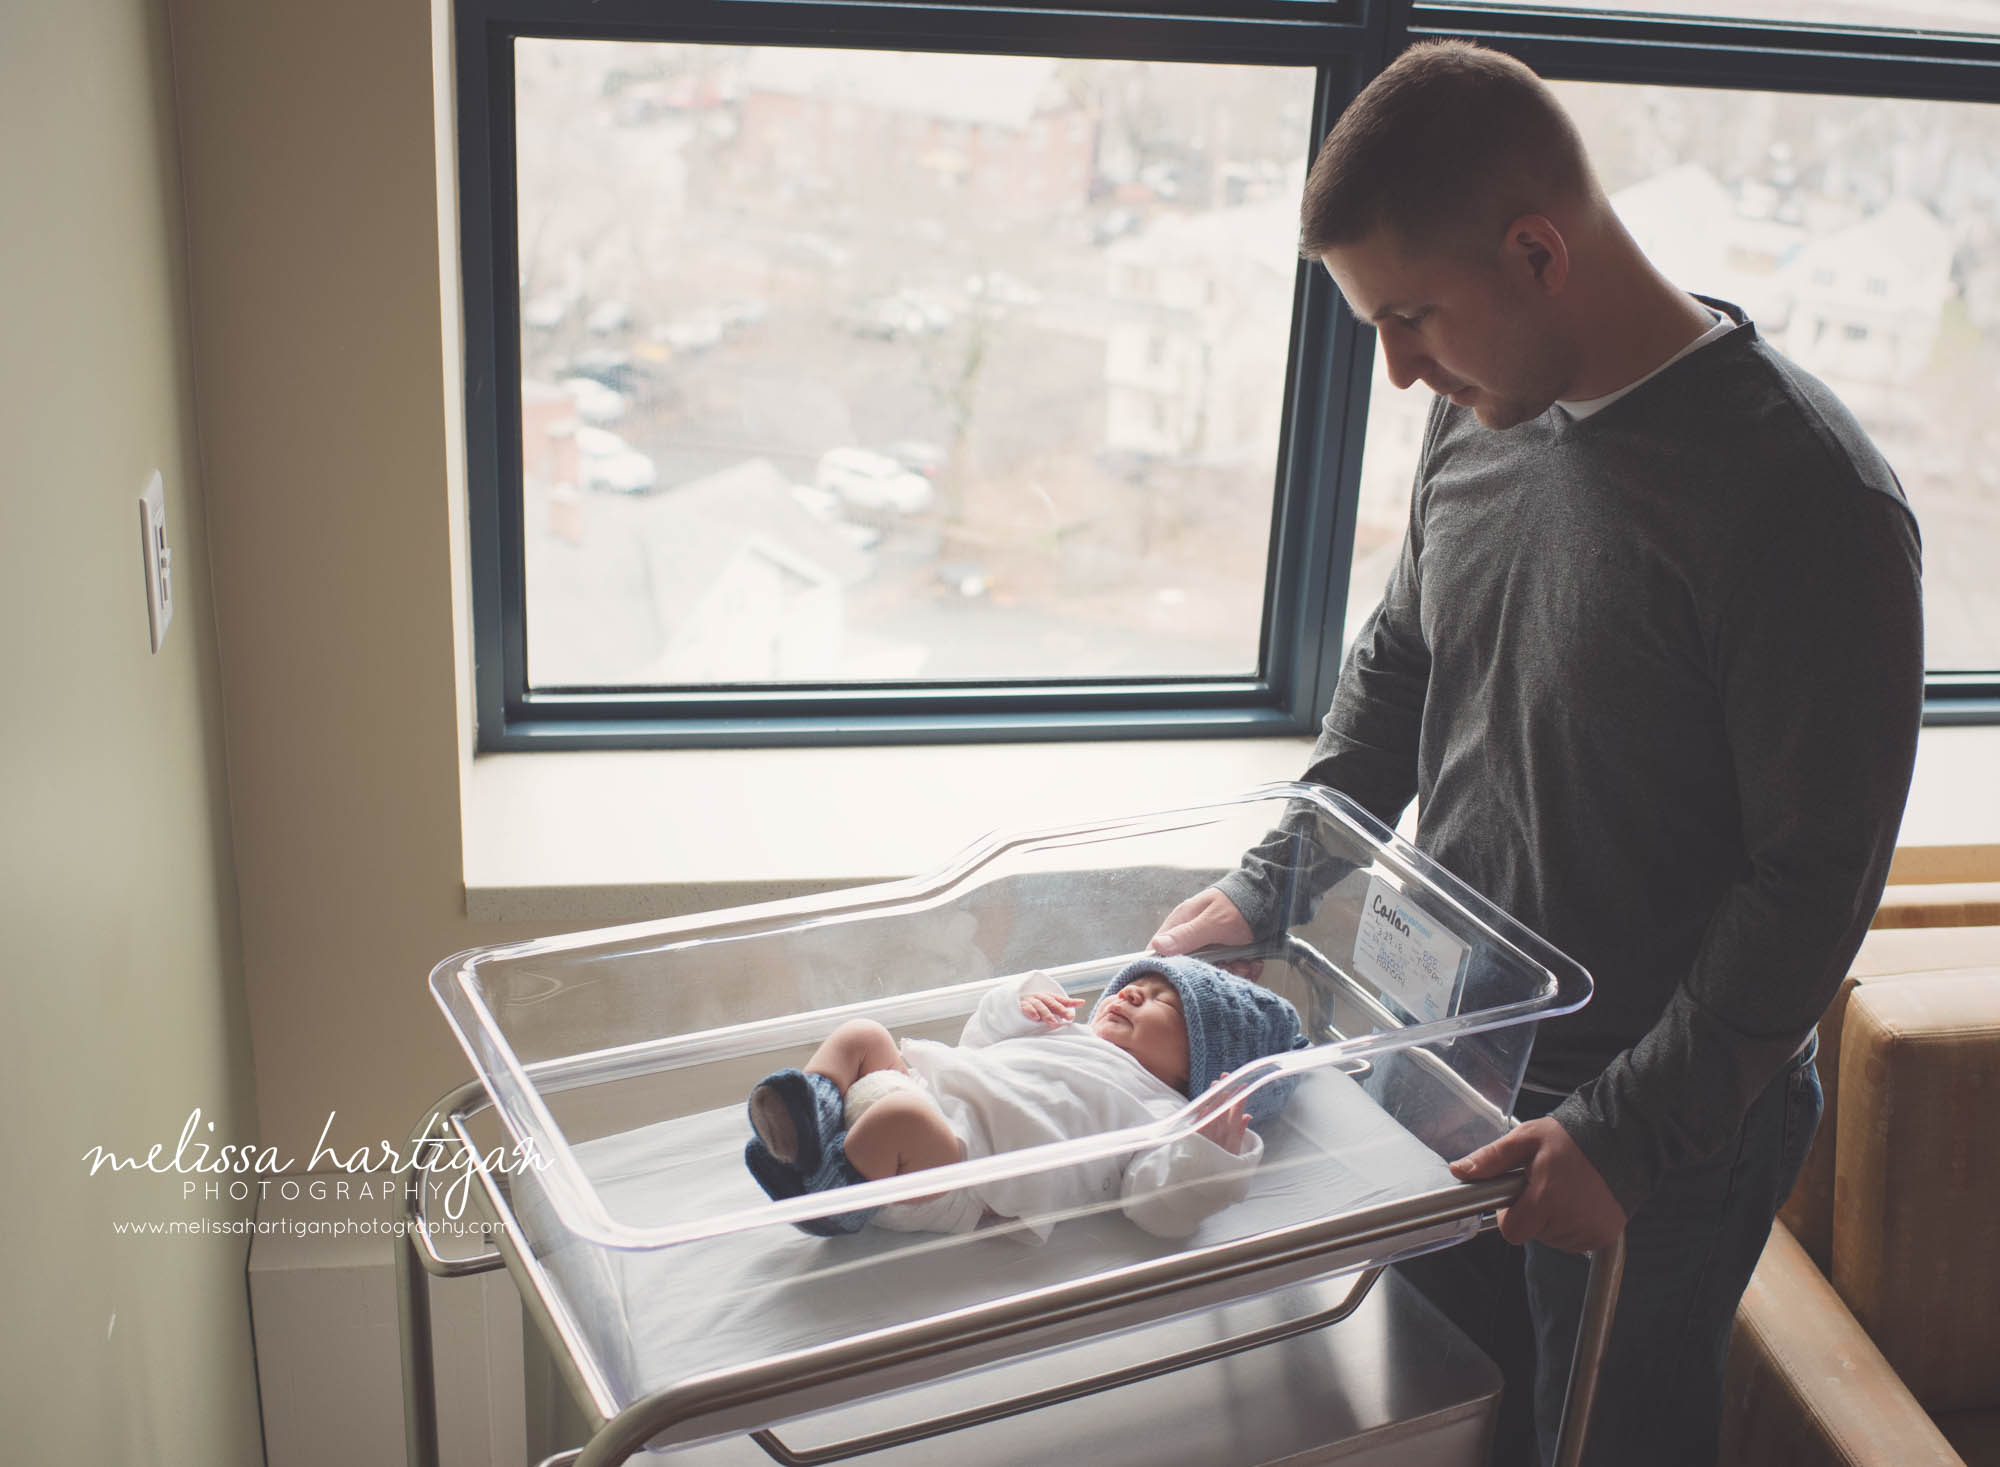 newborn baby is hospital basinet with dad standing over looking at his new baby